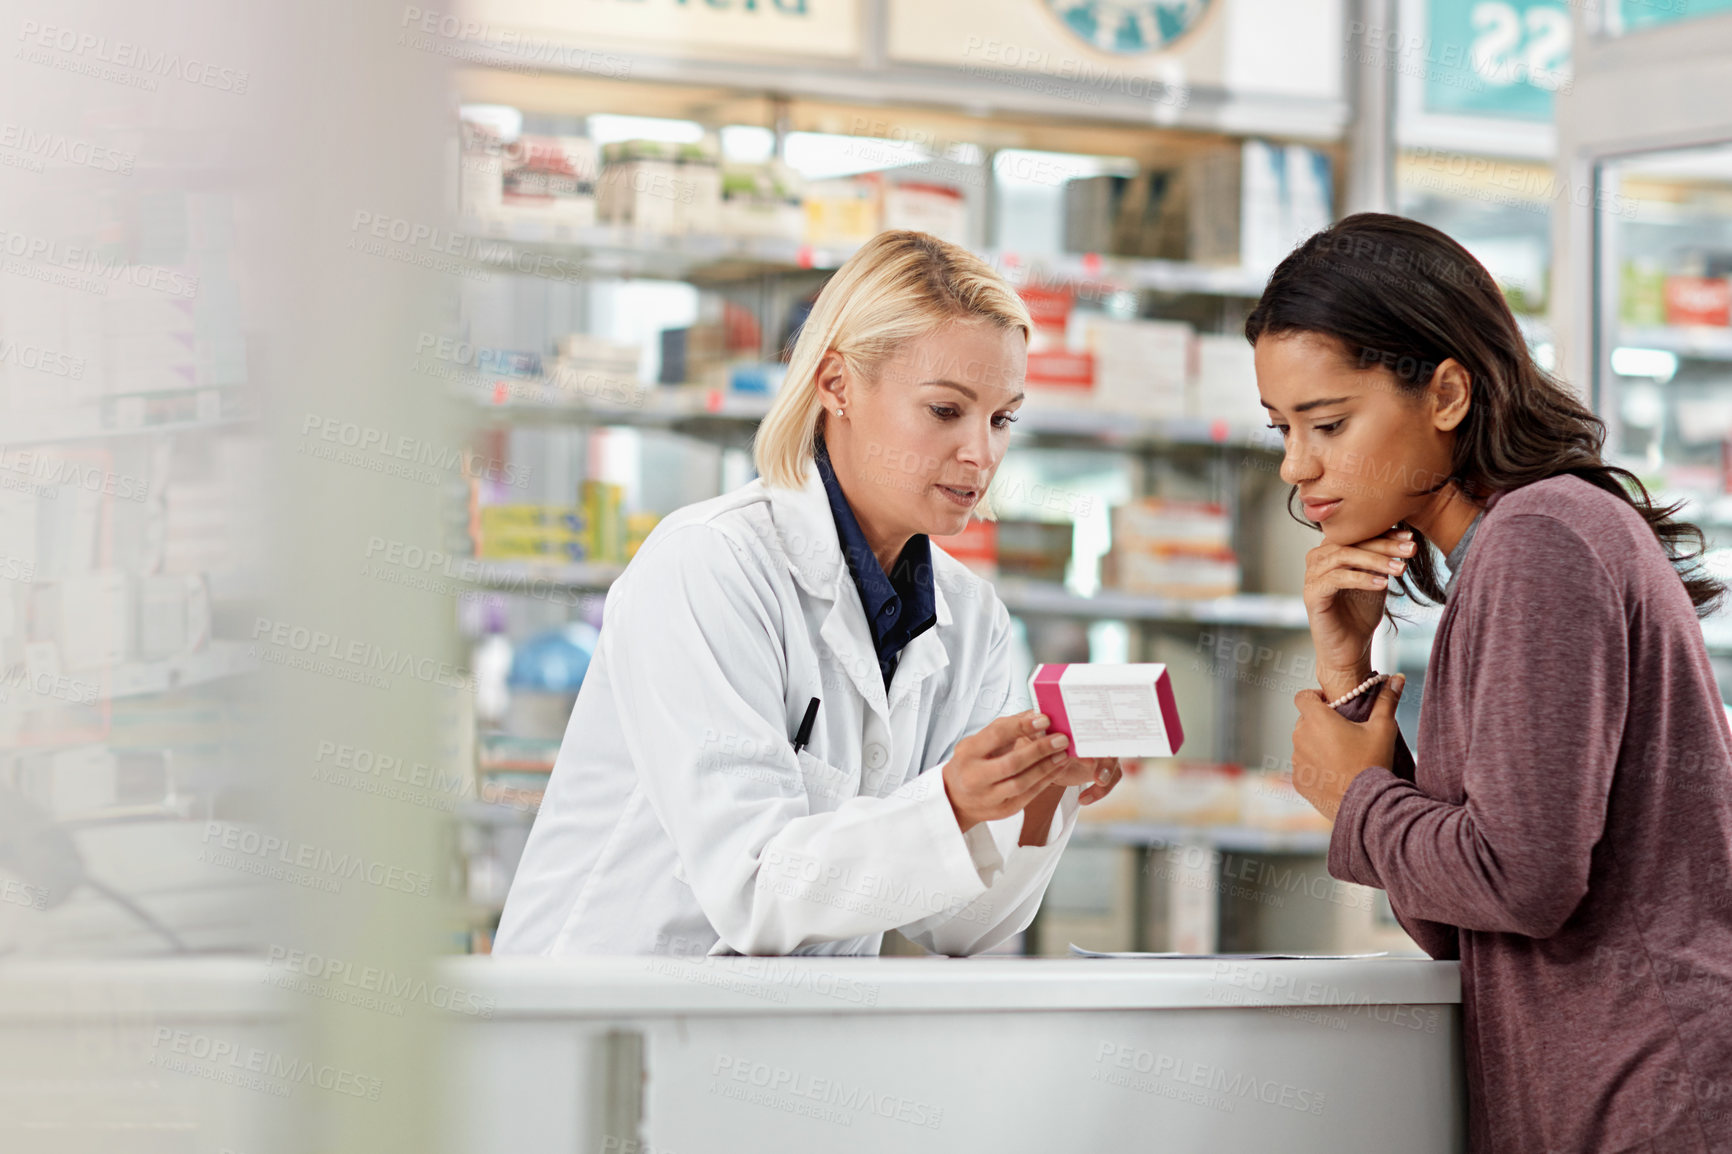 Buy stock photo Consulting customer and focus of store pharmacist at counter for expert help and customer service. Pharmaceutical advice and opinion of worker helping girl with medicine information at pharmacy.